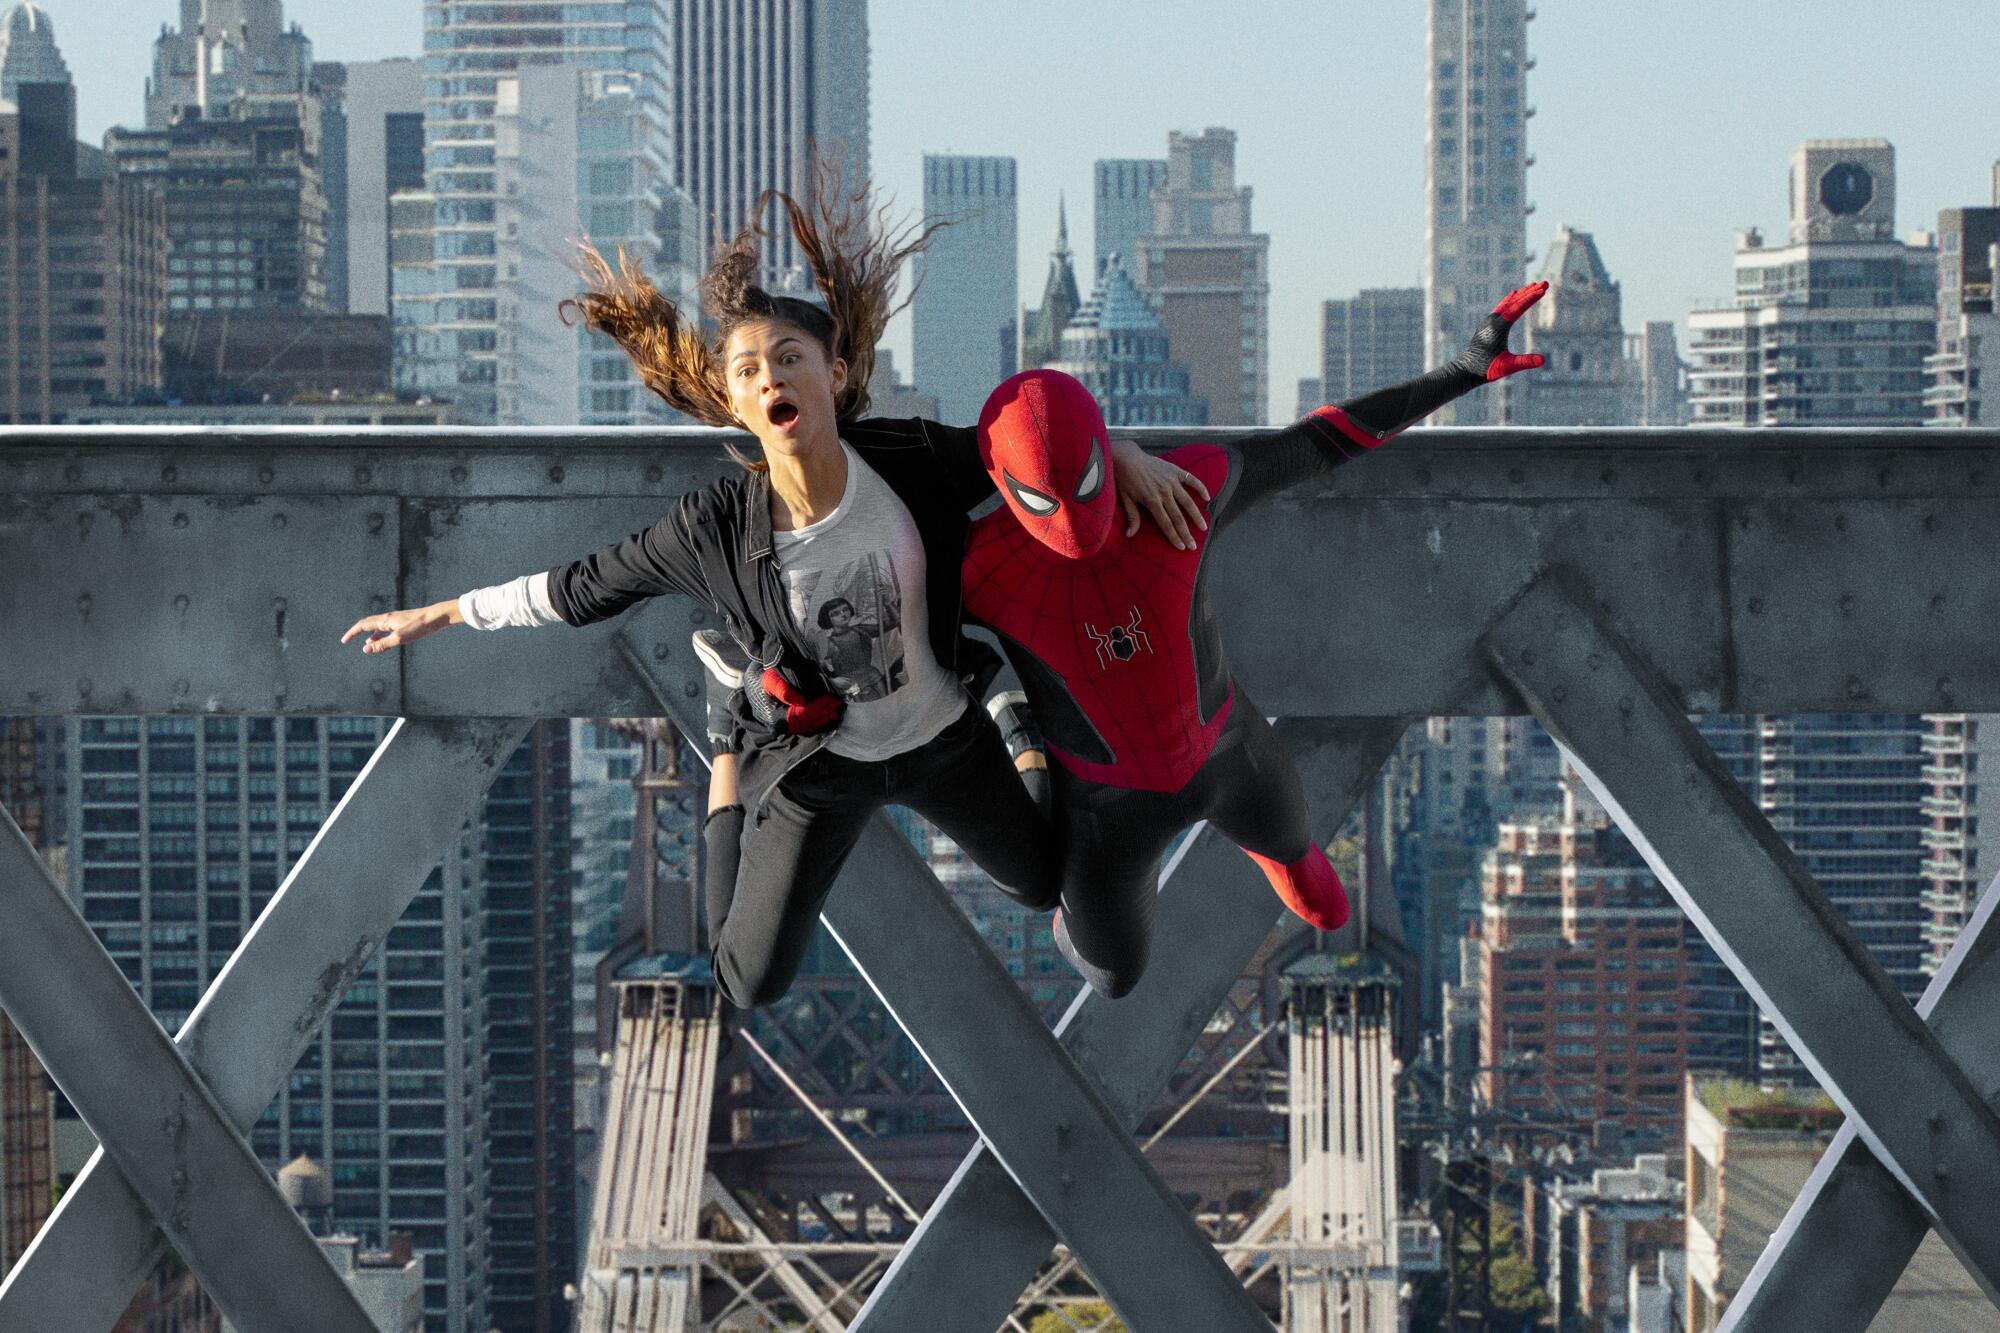 Zendaya and Tom Holland as Spider-Man jump off a bridge in a scene from "Spider-Man: No Way Home"